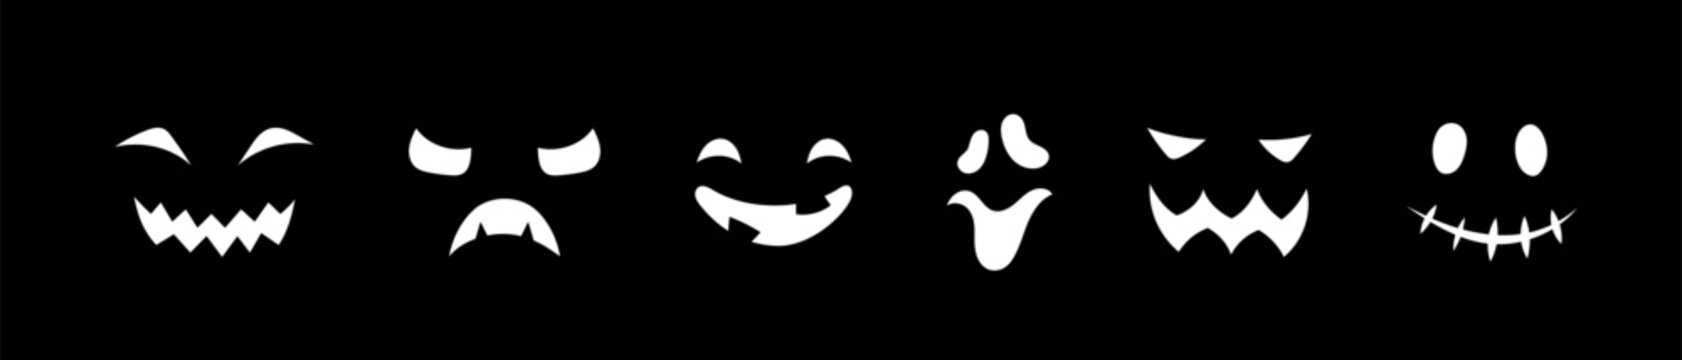 Vector scary faces icons set. Halloween decoration smiling masks. Pumpkin funny smiles. Ghost white face collection isolated on black background for web, decor, fashion print, app